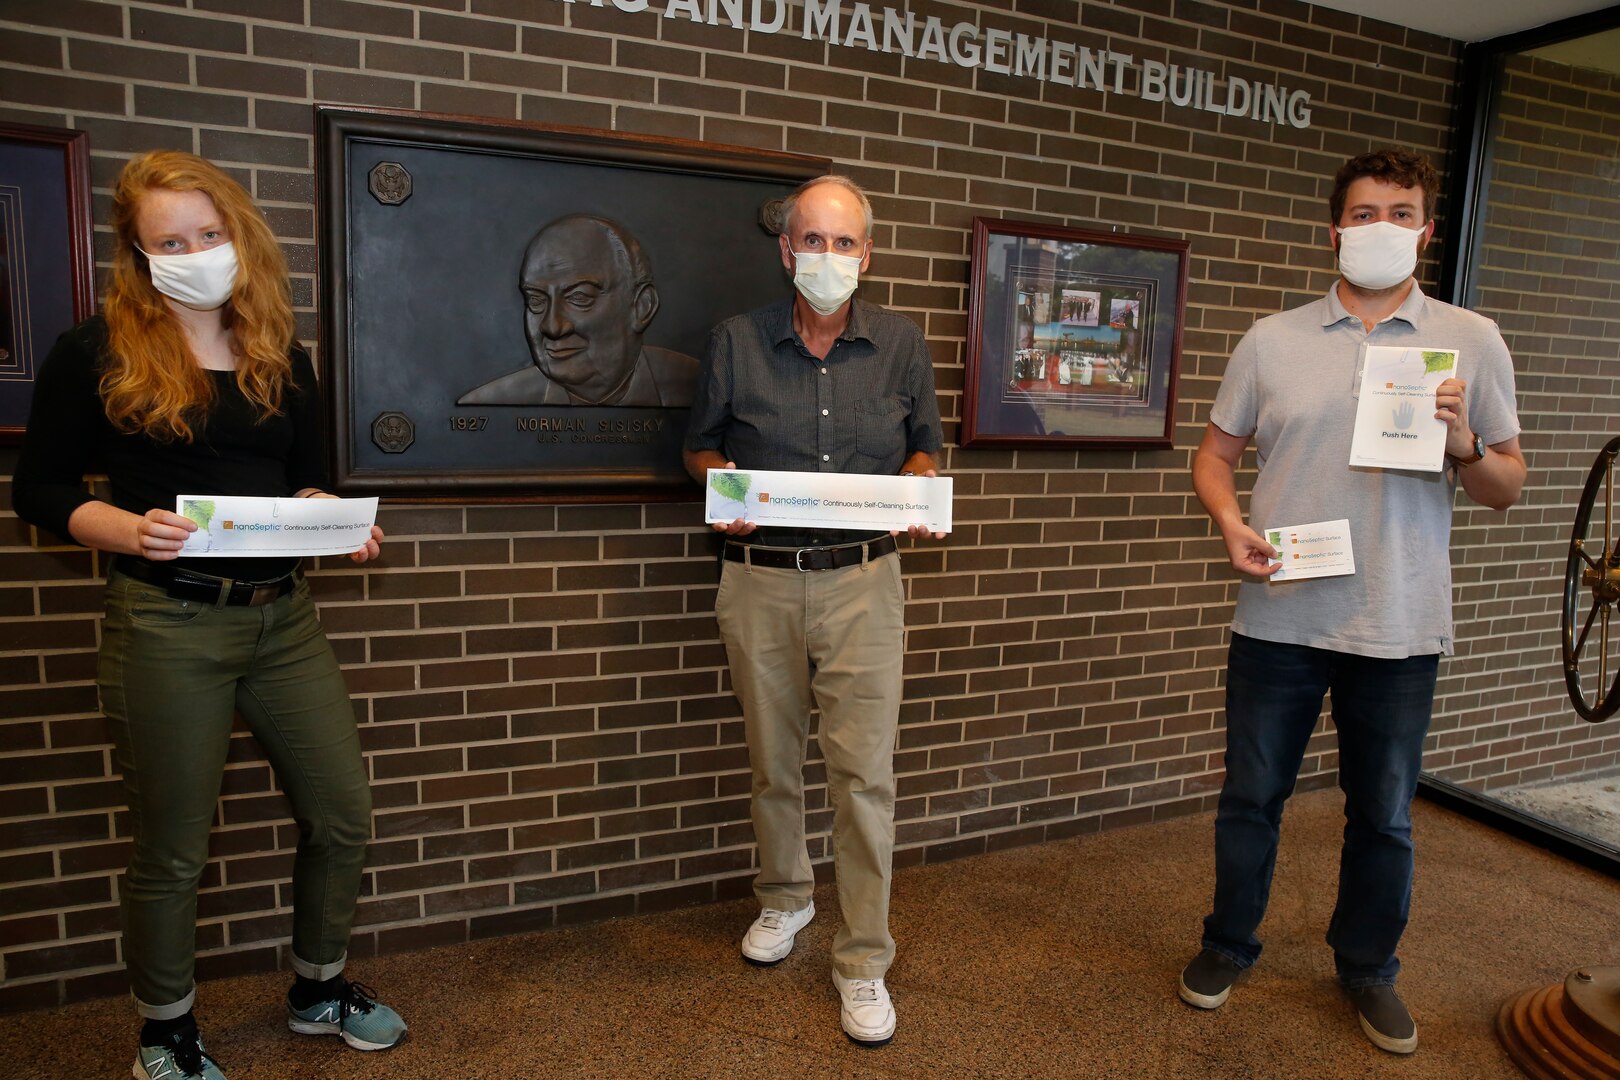 Nuclear Engineers Cynthia Raines (Code 2310.4) and Ben Campbell (2310.2) and Code 2310.4 Branch Head Rob Harrington are responsible for bringing NanoSeptic technology to NNSY. The technology self-sanitizes making high-touch areas safer for NNSY employees.